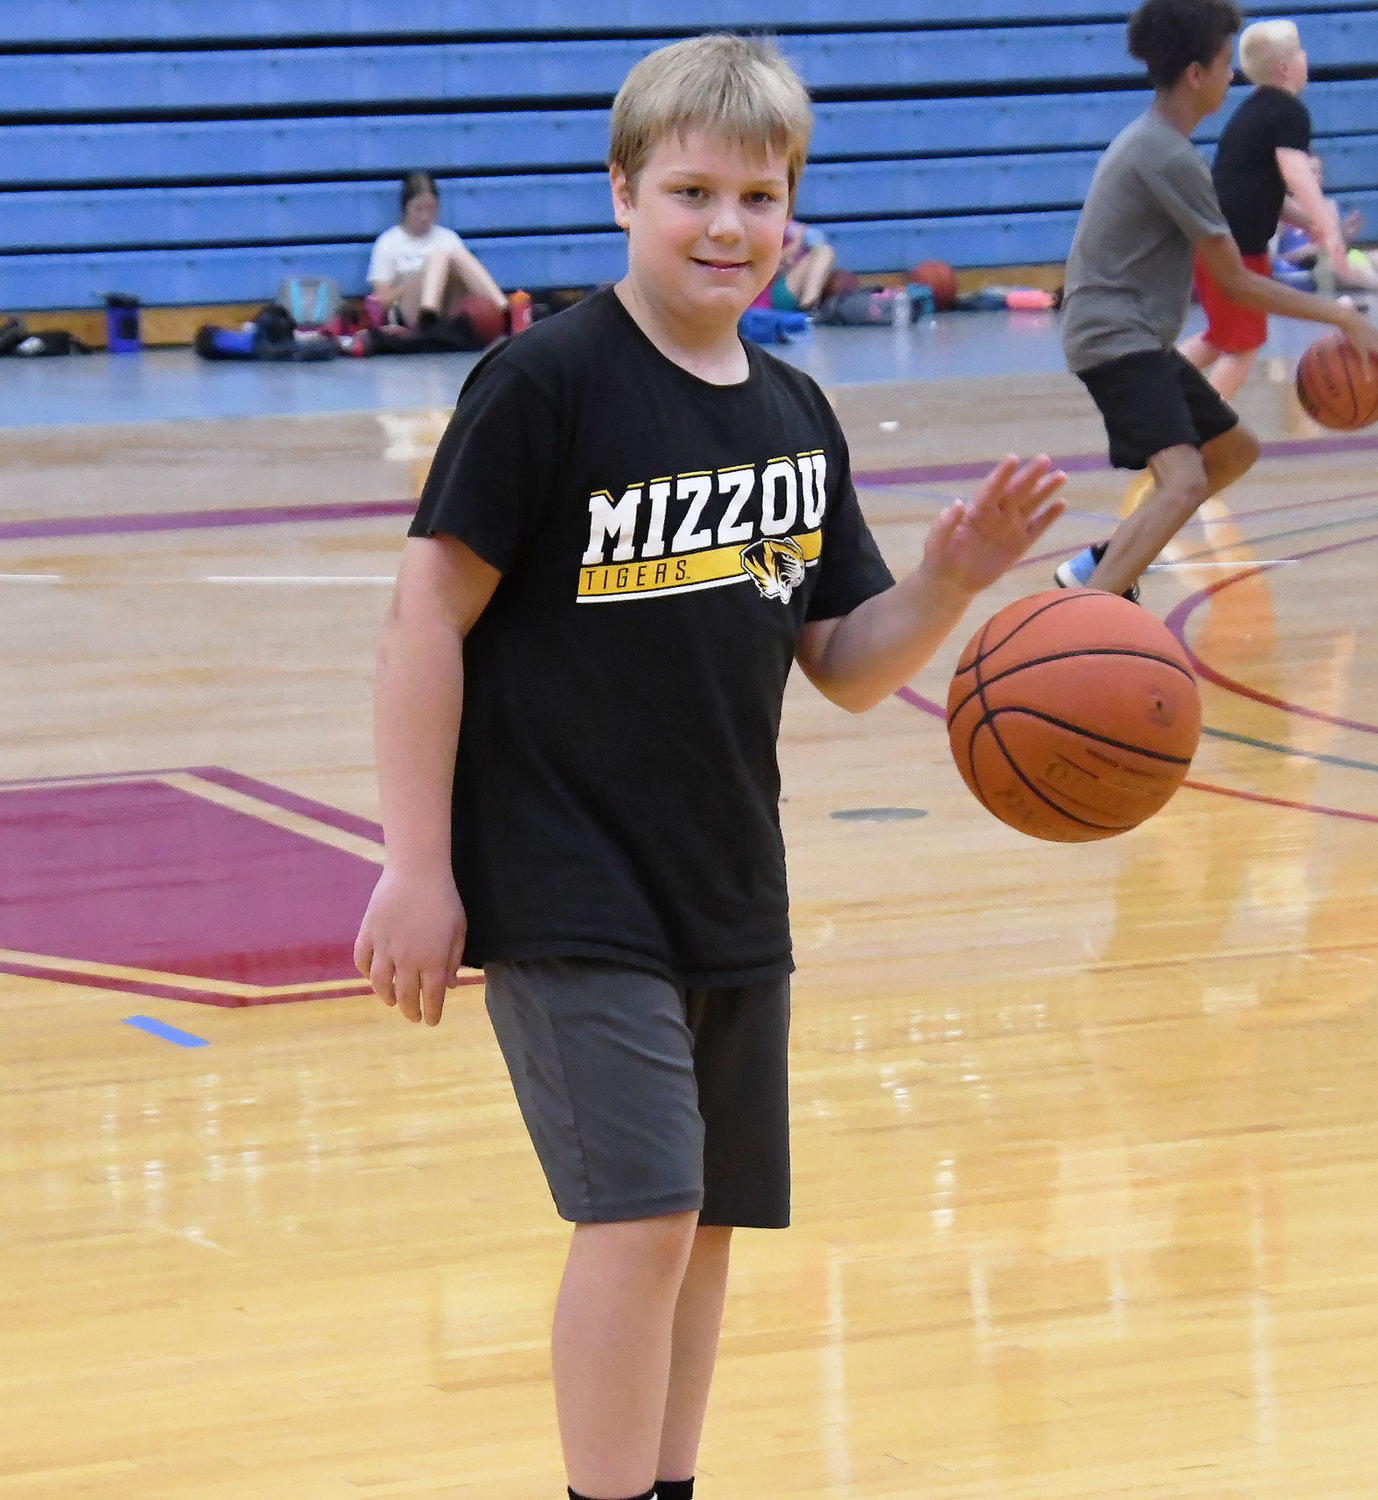 Brennen Douglass, in the University of Missouri T-shirt, smiles and dribbles at the same time.